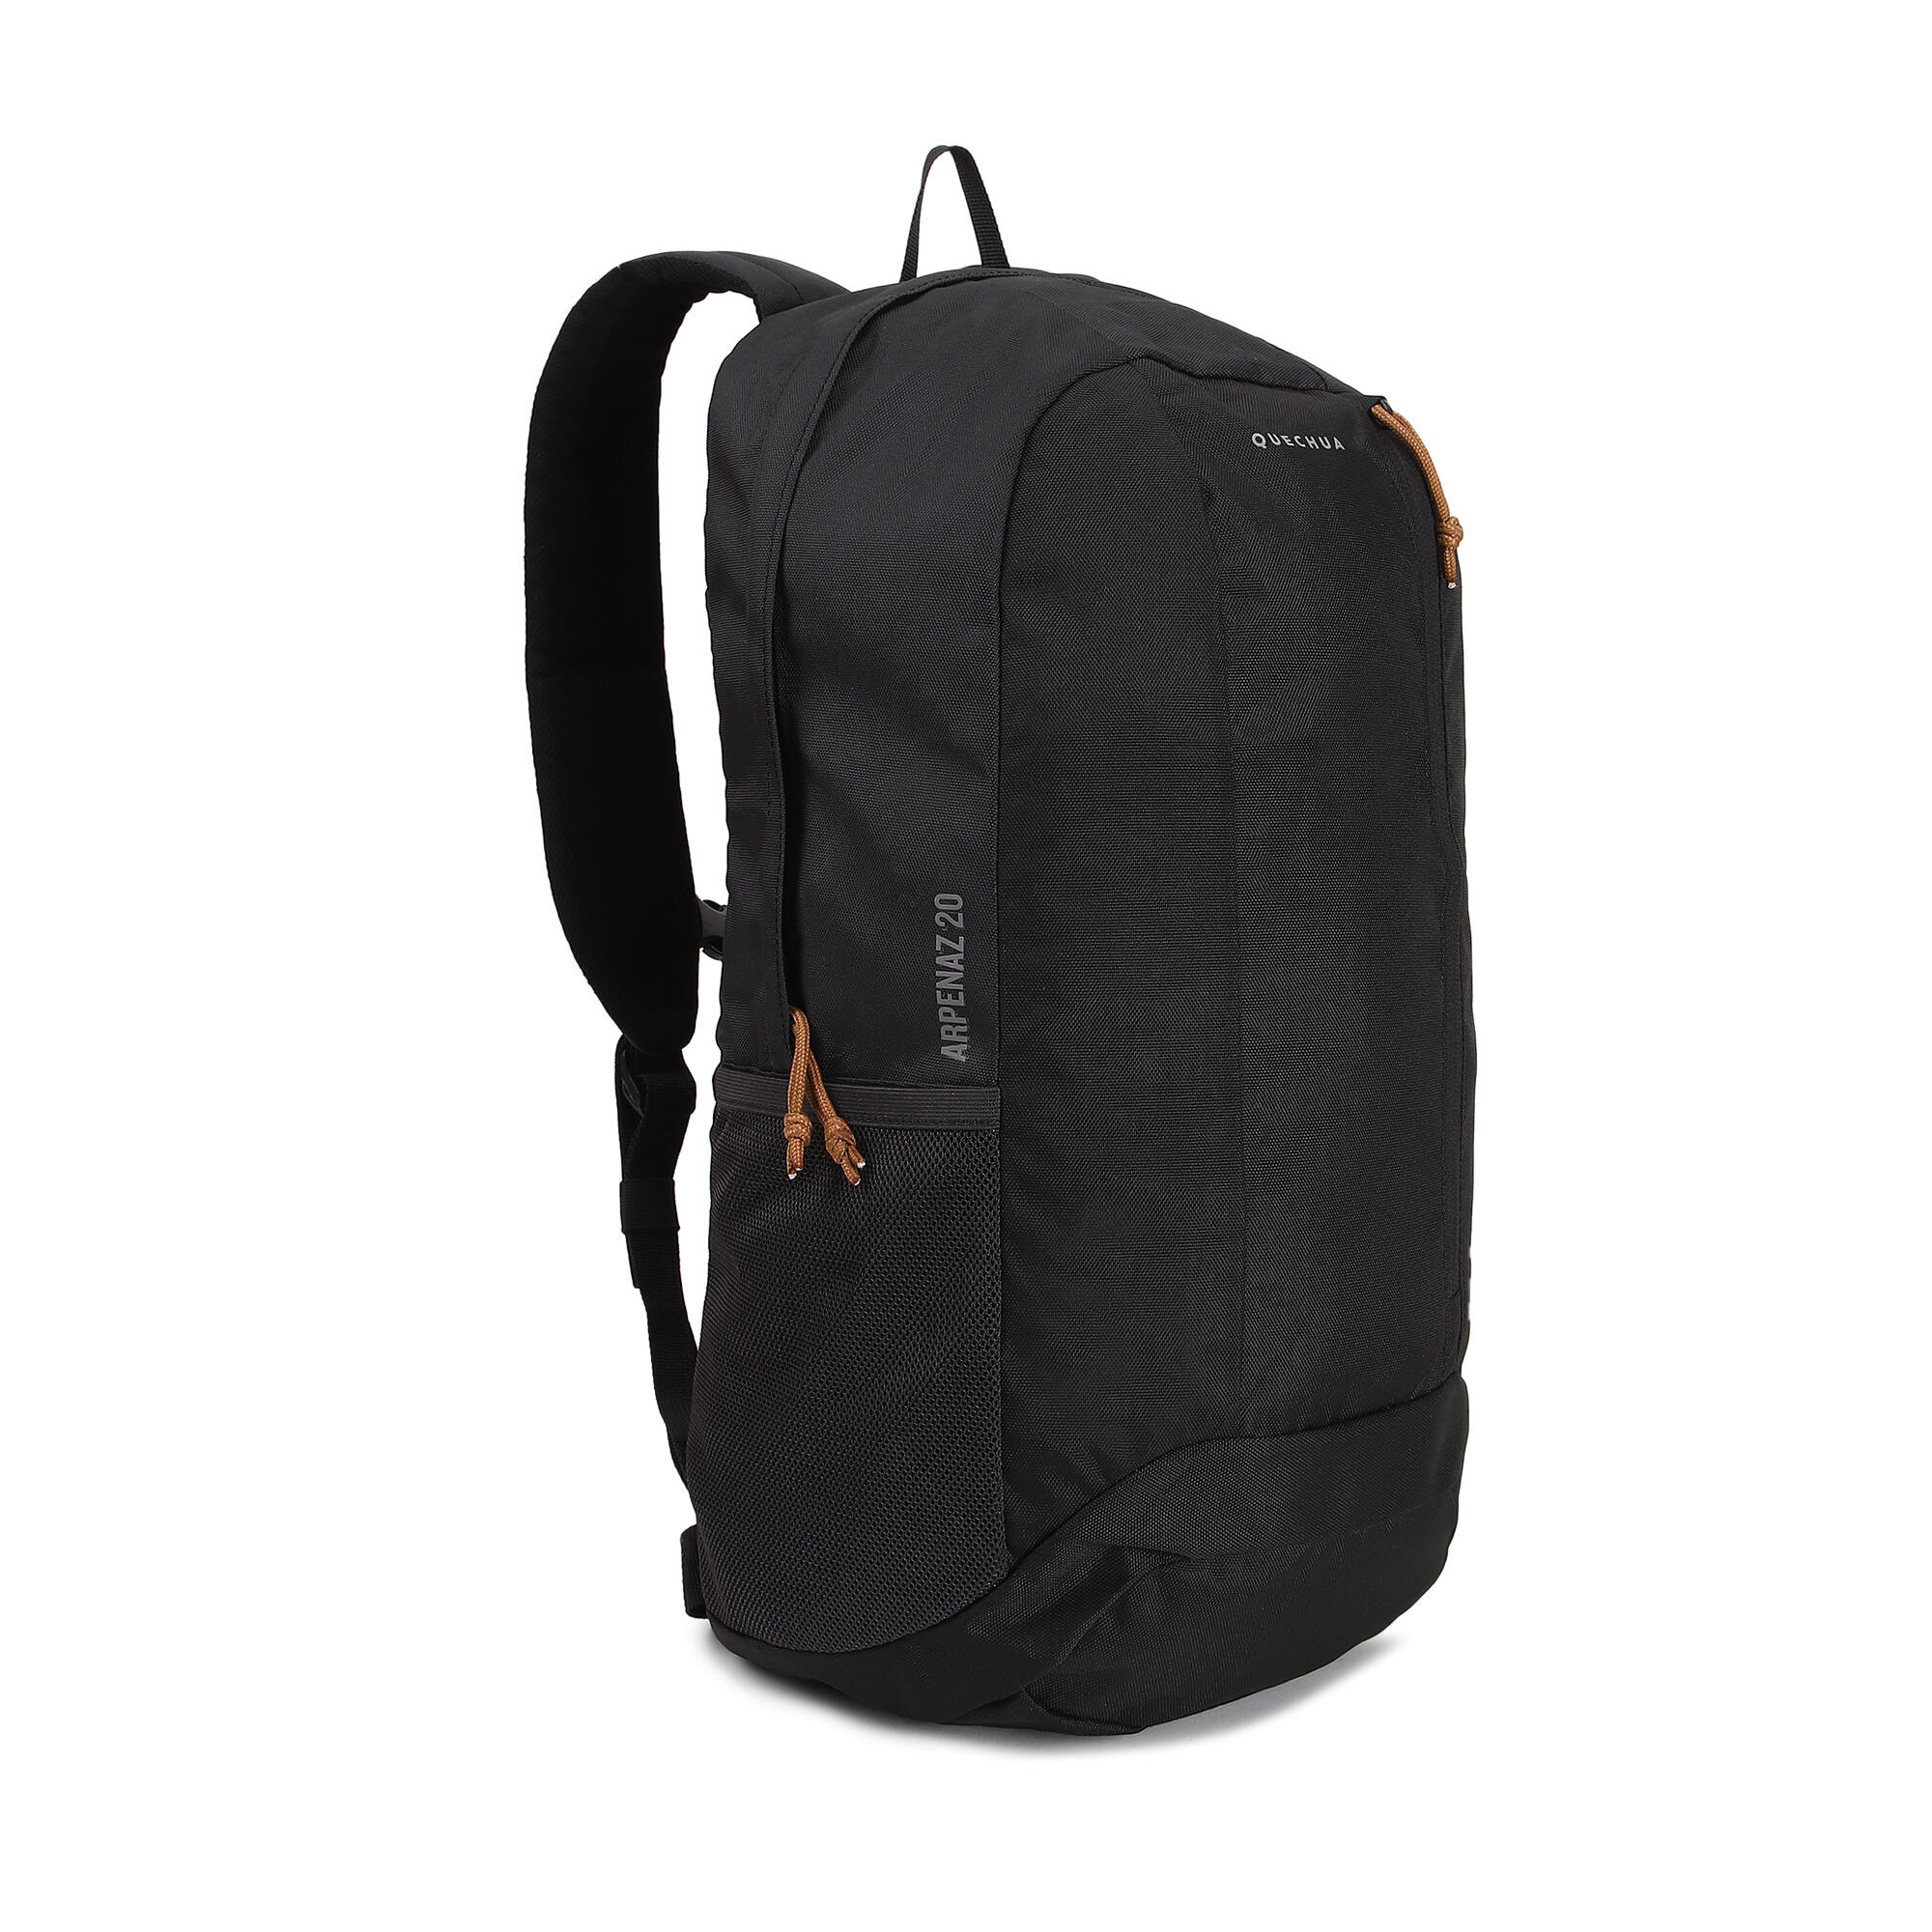 Backpack Buying Guide | Expert Guide | Mountain Warehouse US